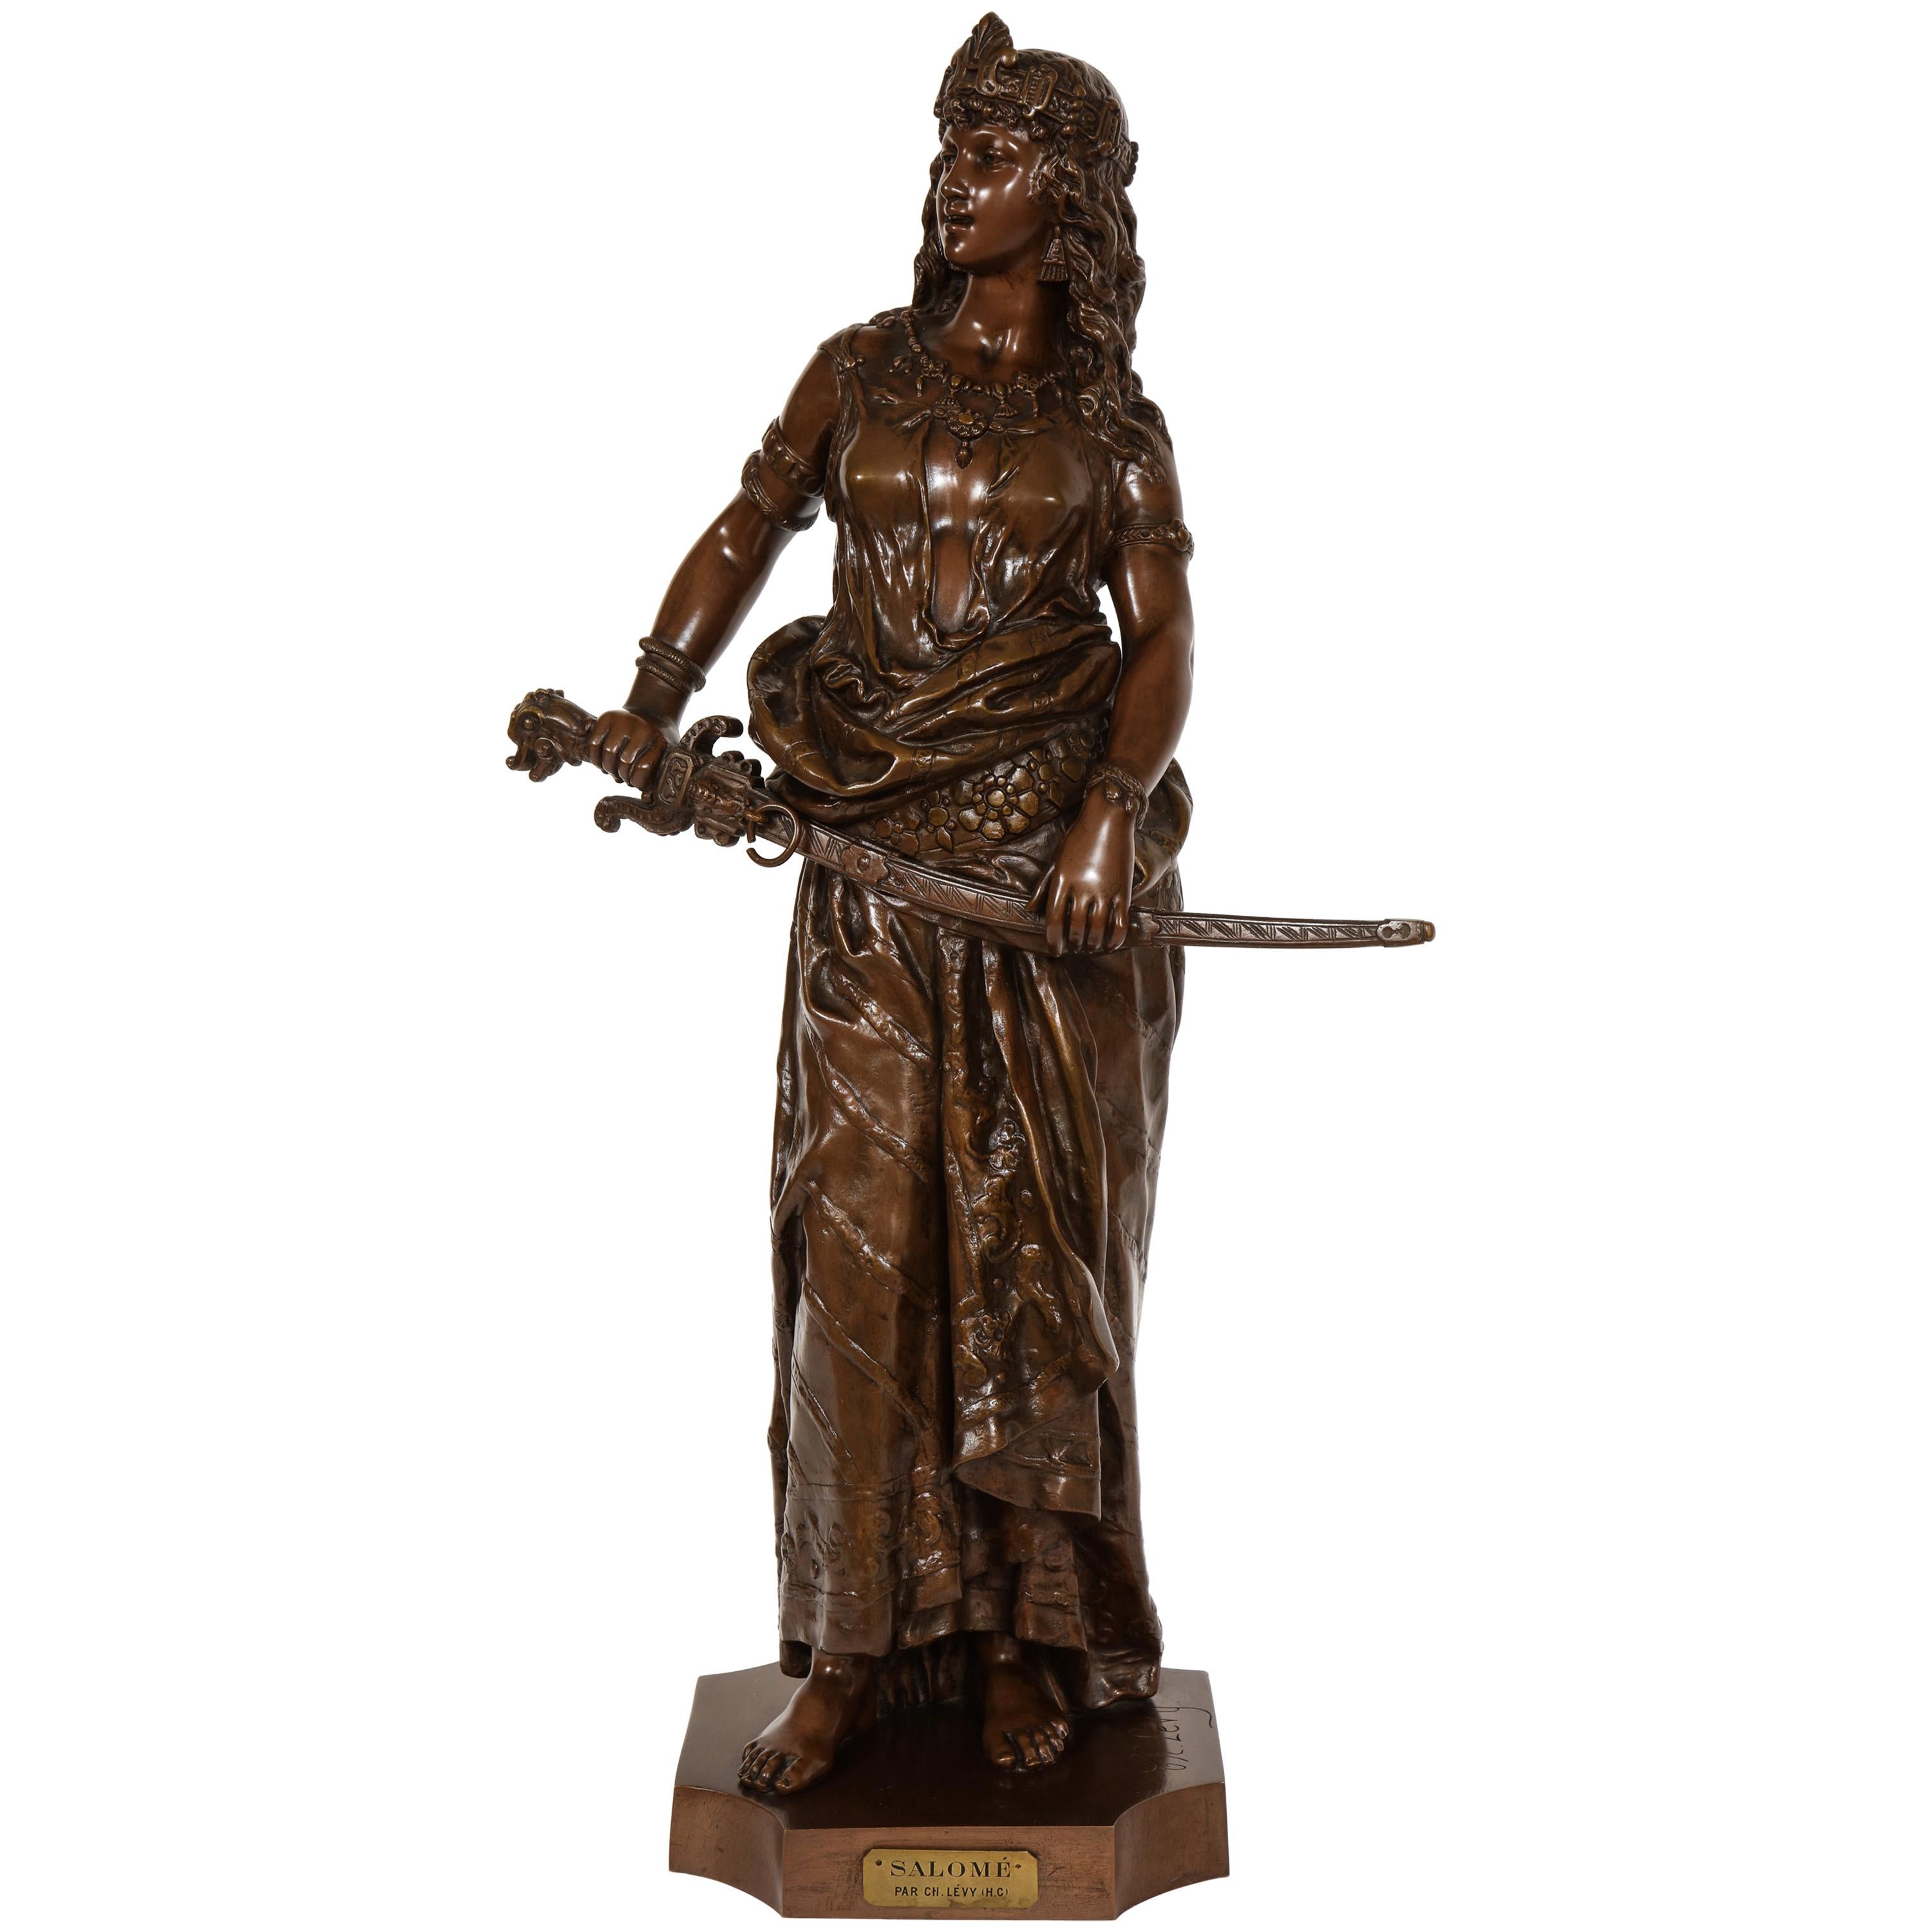 Large Patinated Bronze Sculpture of "Salome" by Charles Octave Levy